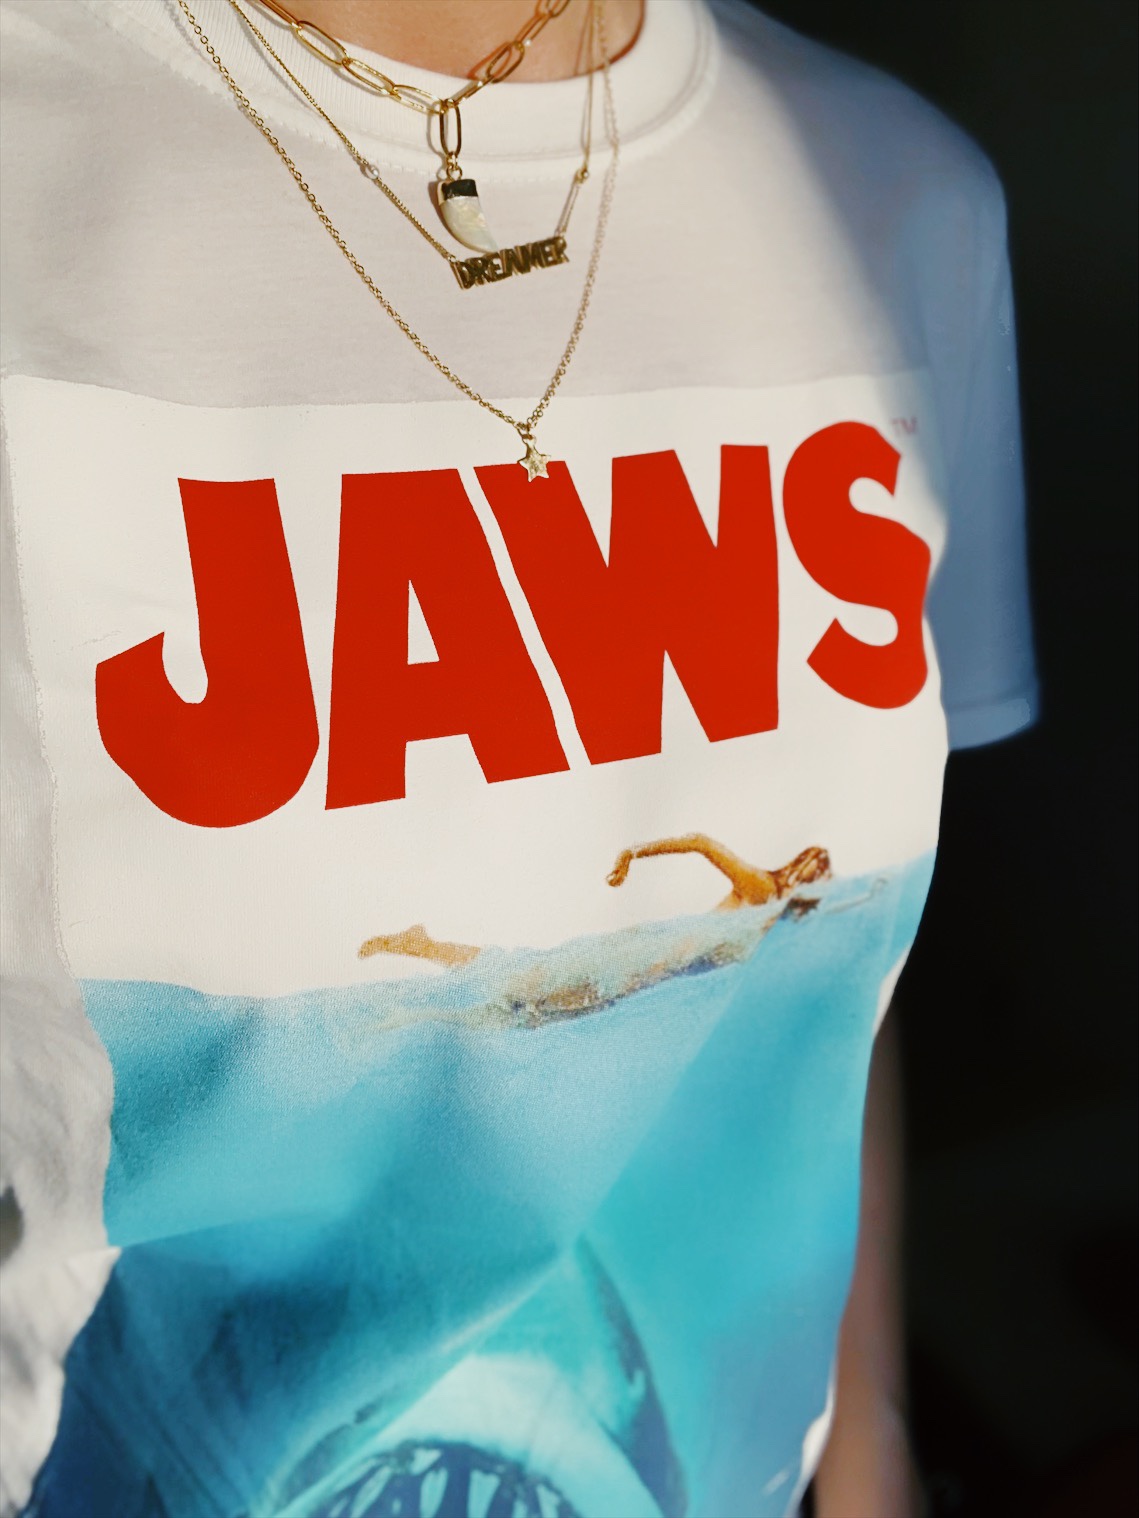 Jaws shirt and layering necklaces